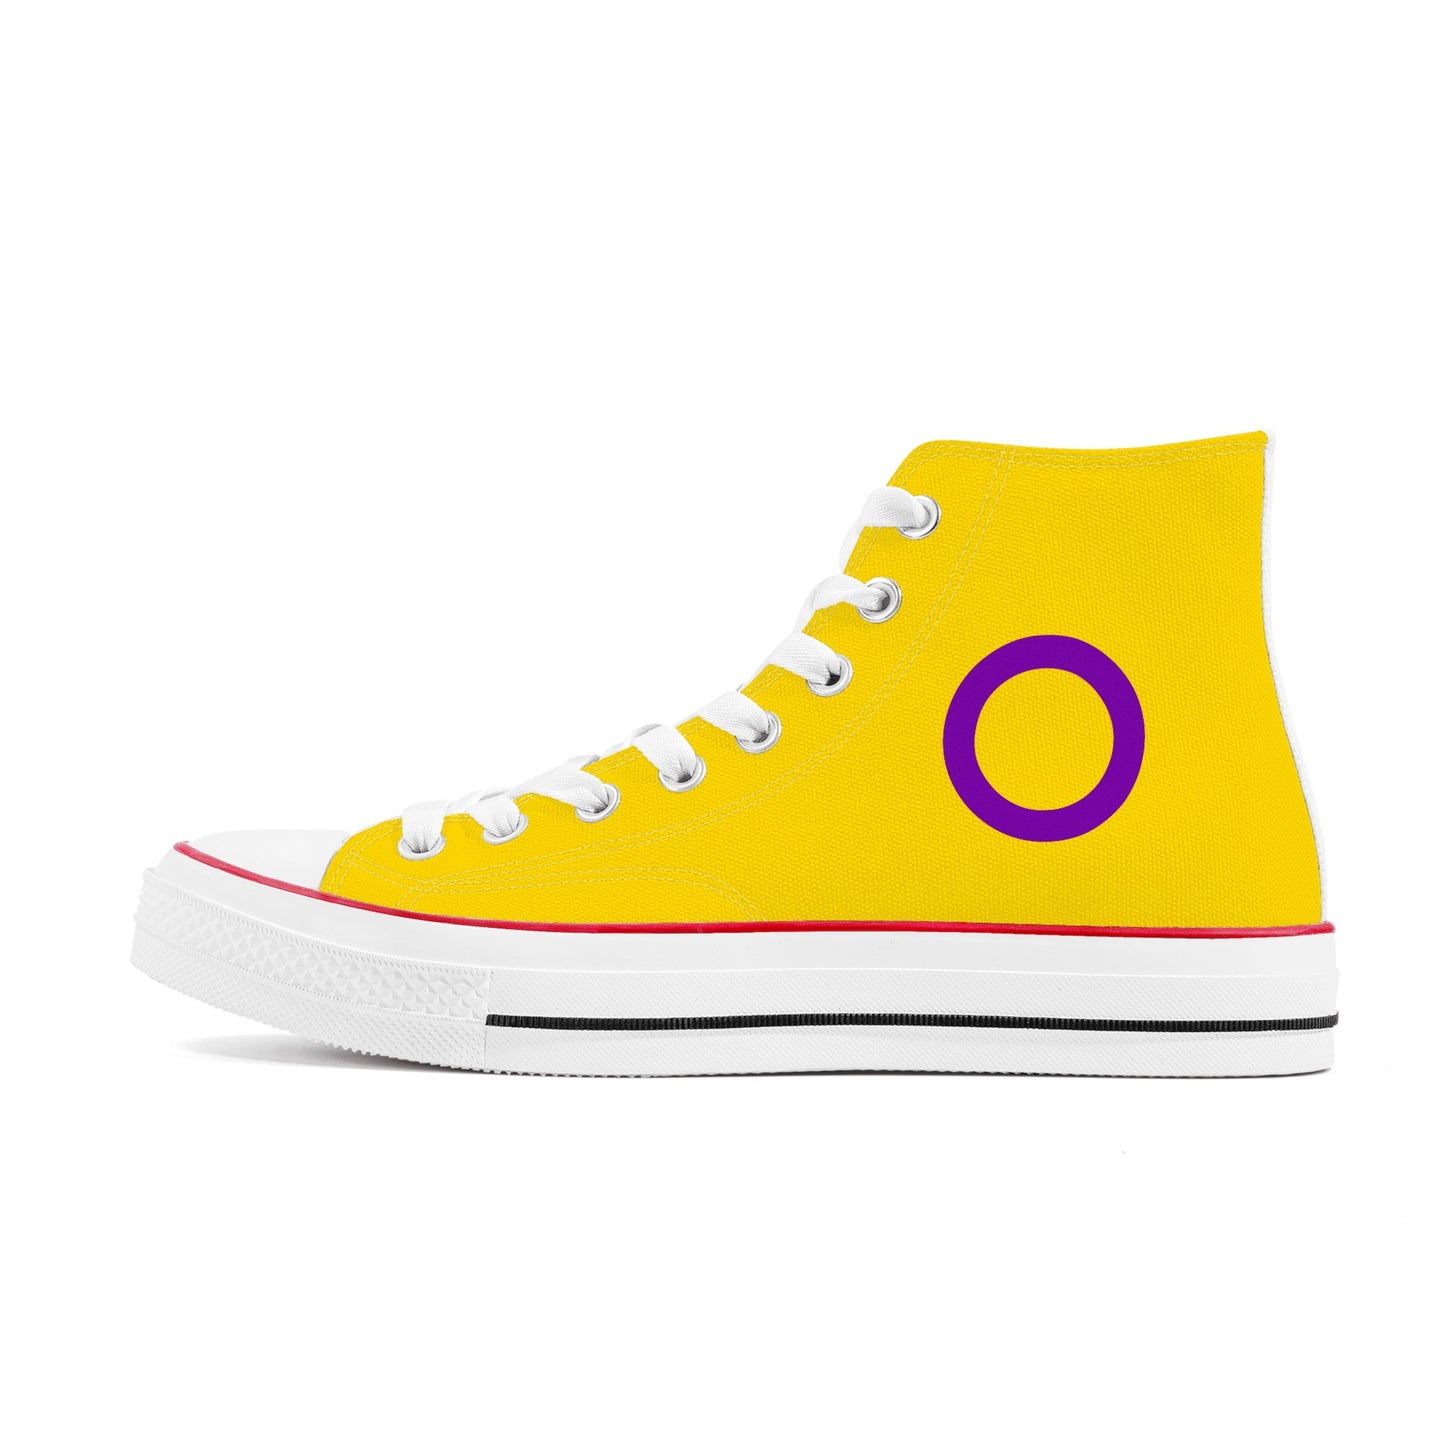 Intersex Pride Collection - Mens Classic High Top Canvas Shoes for the LGBTQIA+ community